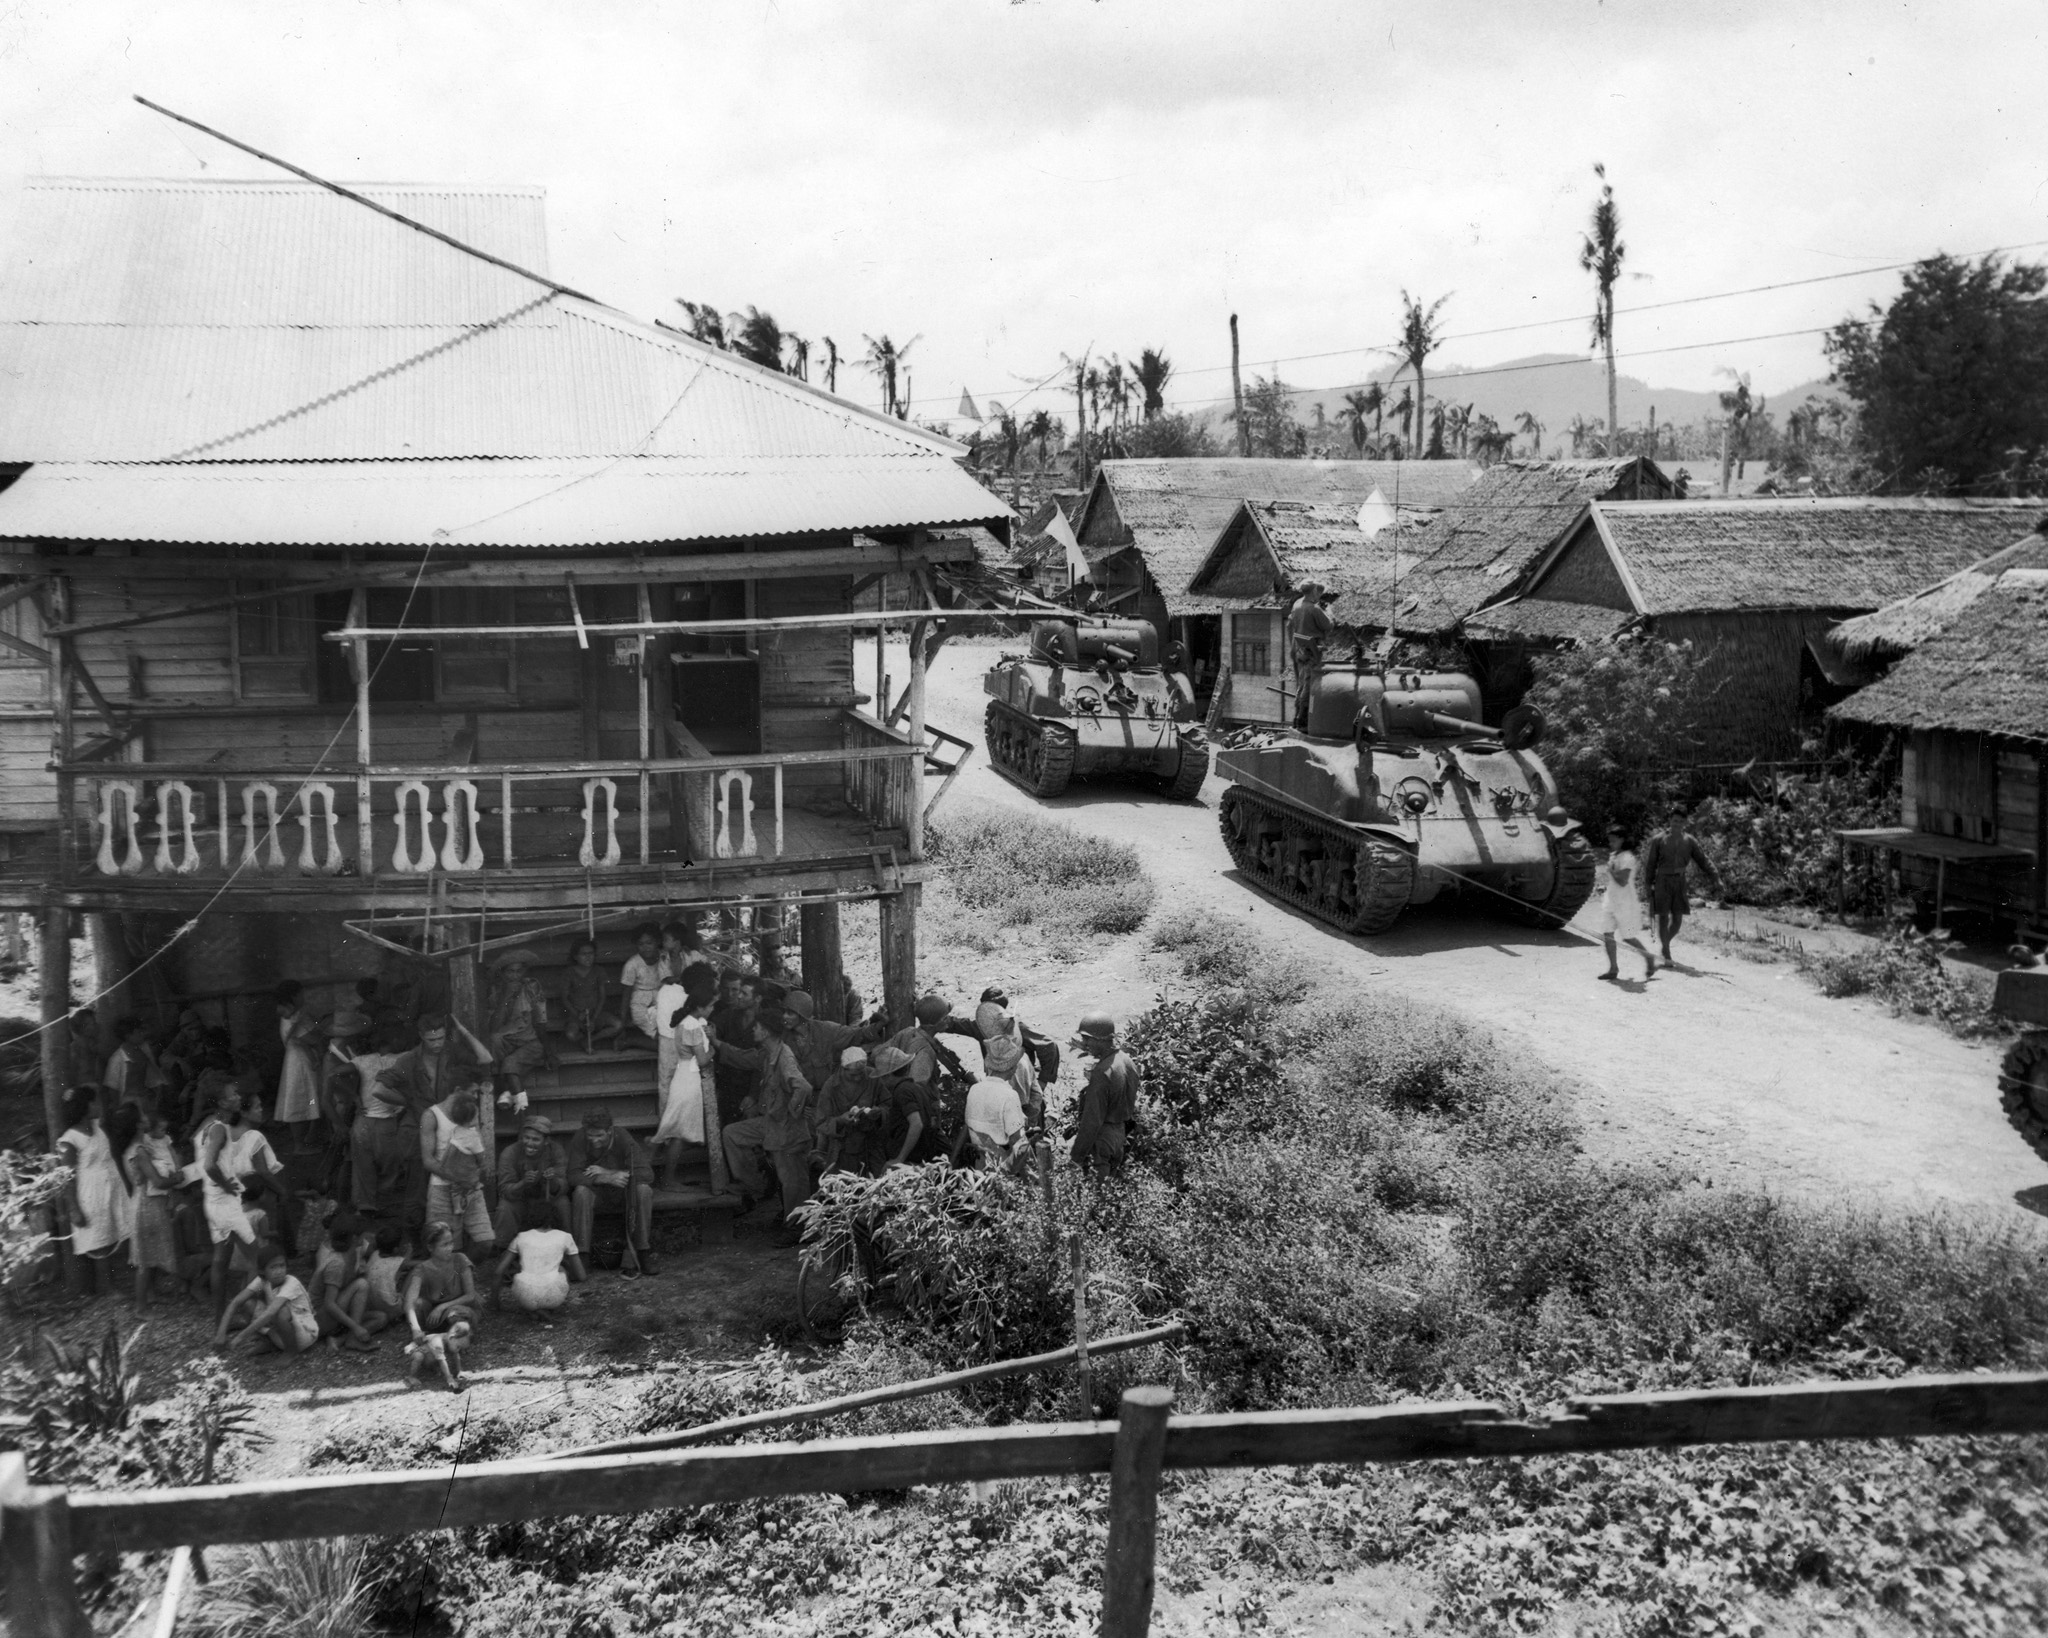 Villagers chat with American soldiers after being freed from Japanese occupation while Sherman tanks of the 1st Cavalry Division follow the retreating enemy, Philippines, October 1944.